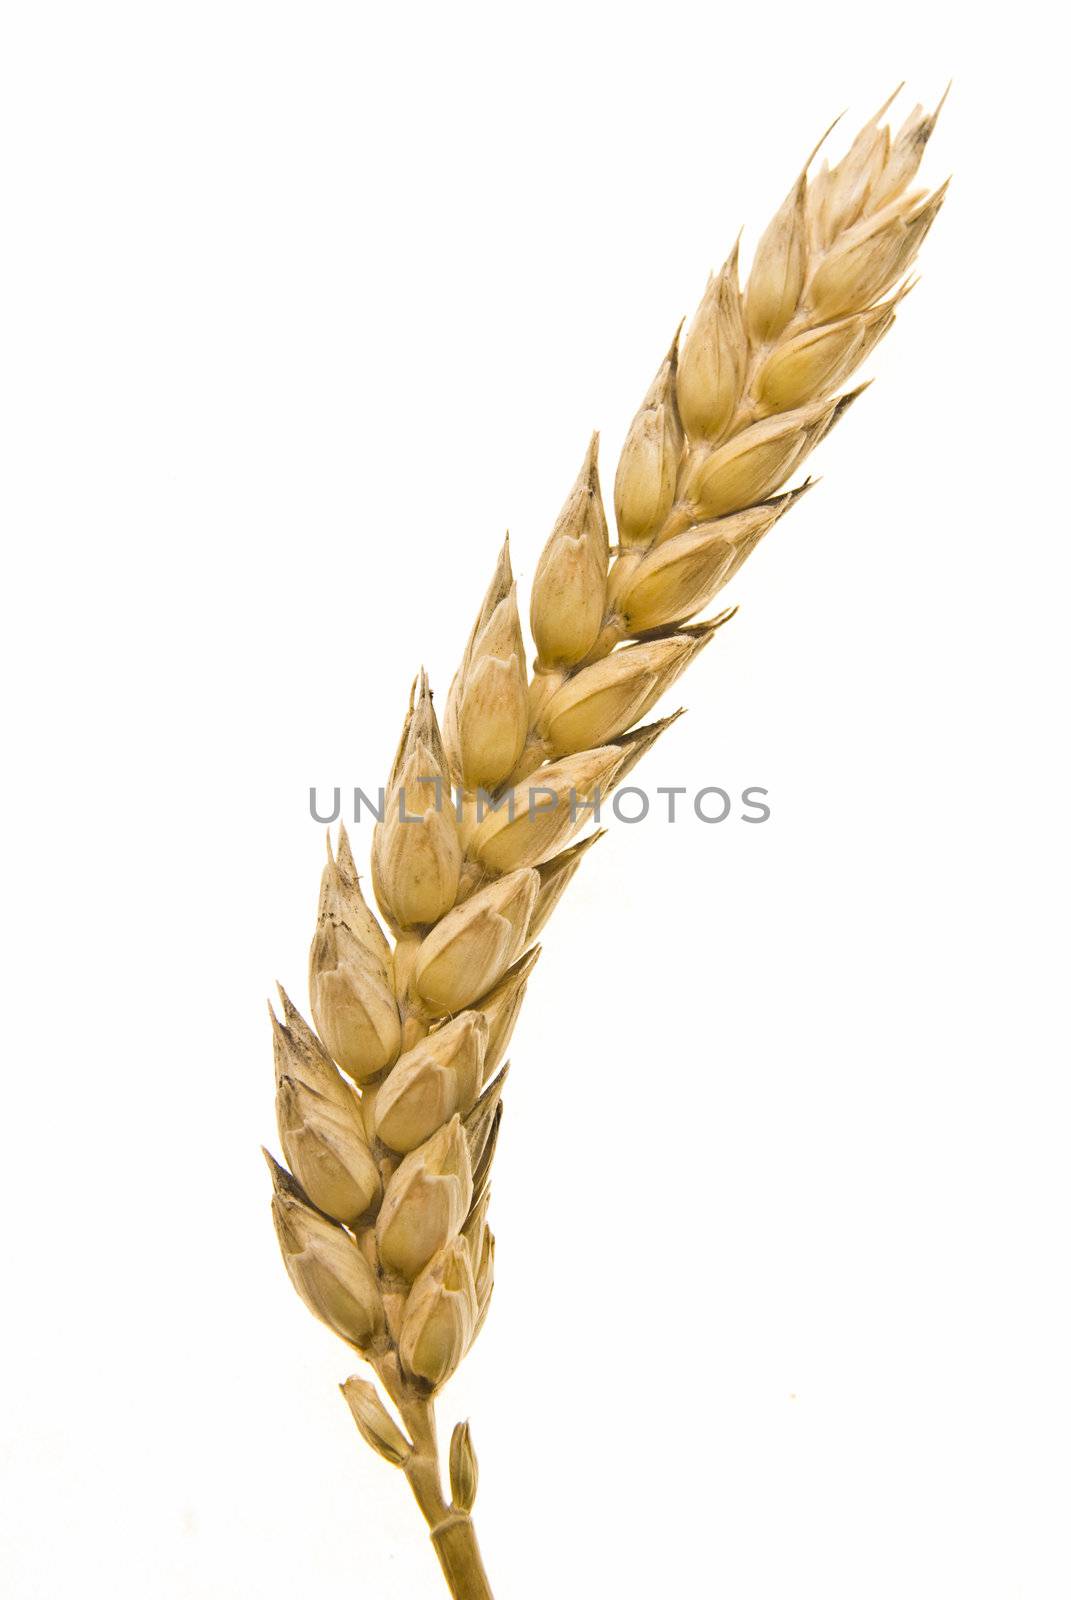 Wheat on white by adamr